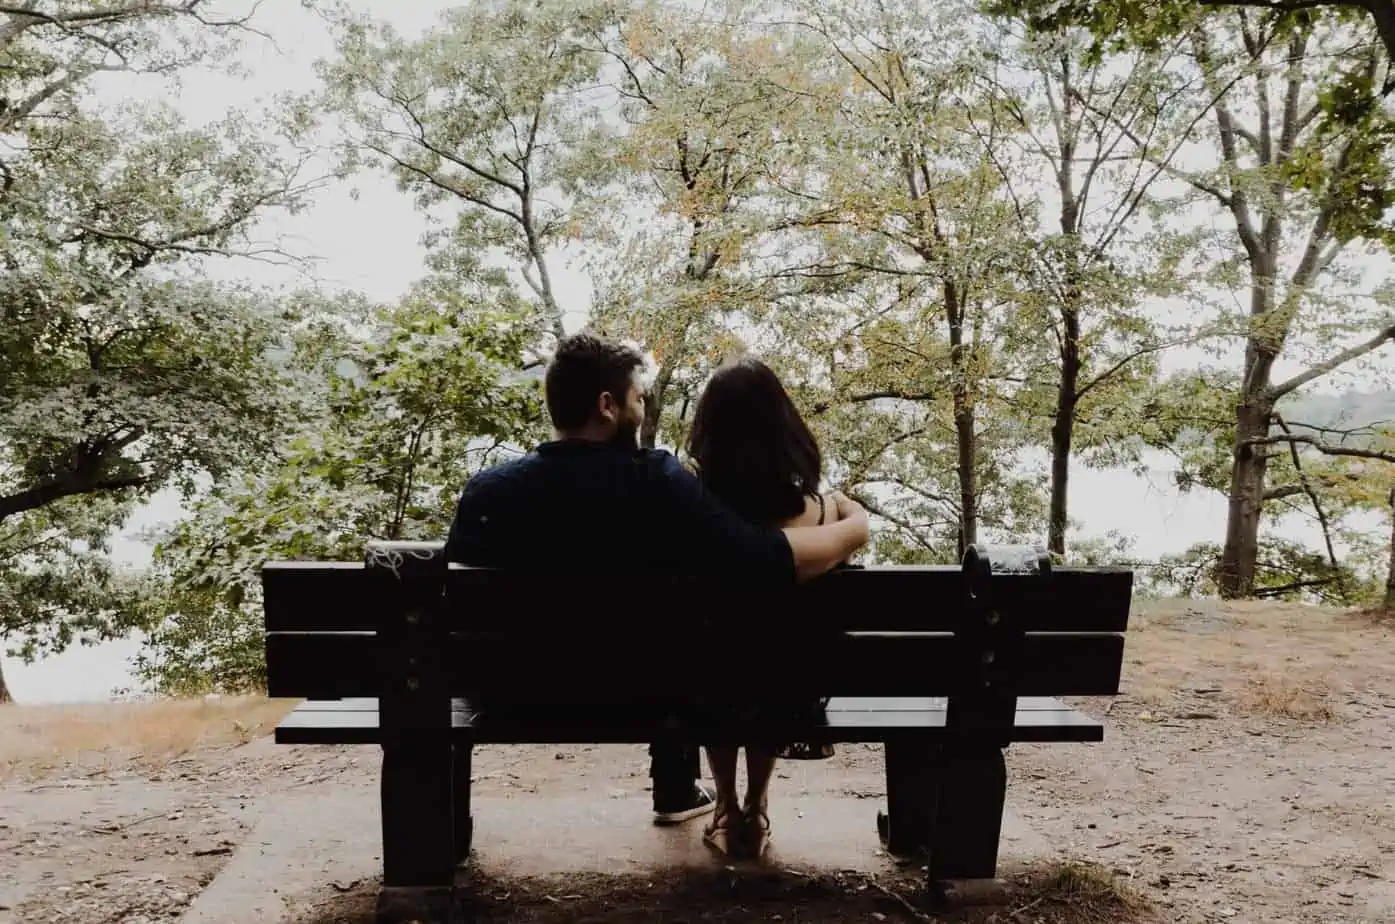 Mountainside Treatment Center: A man and women sitting on a bench outdoors